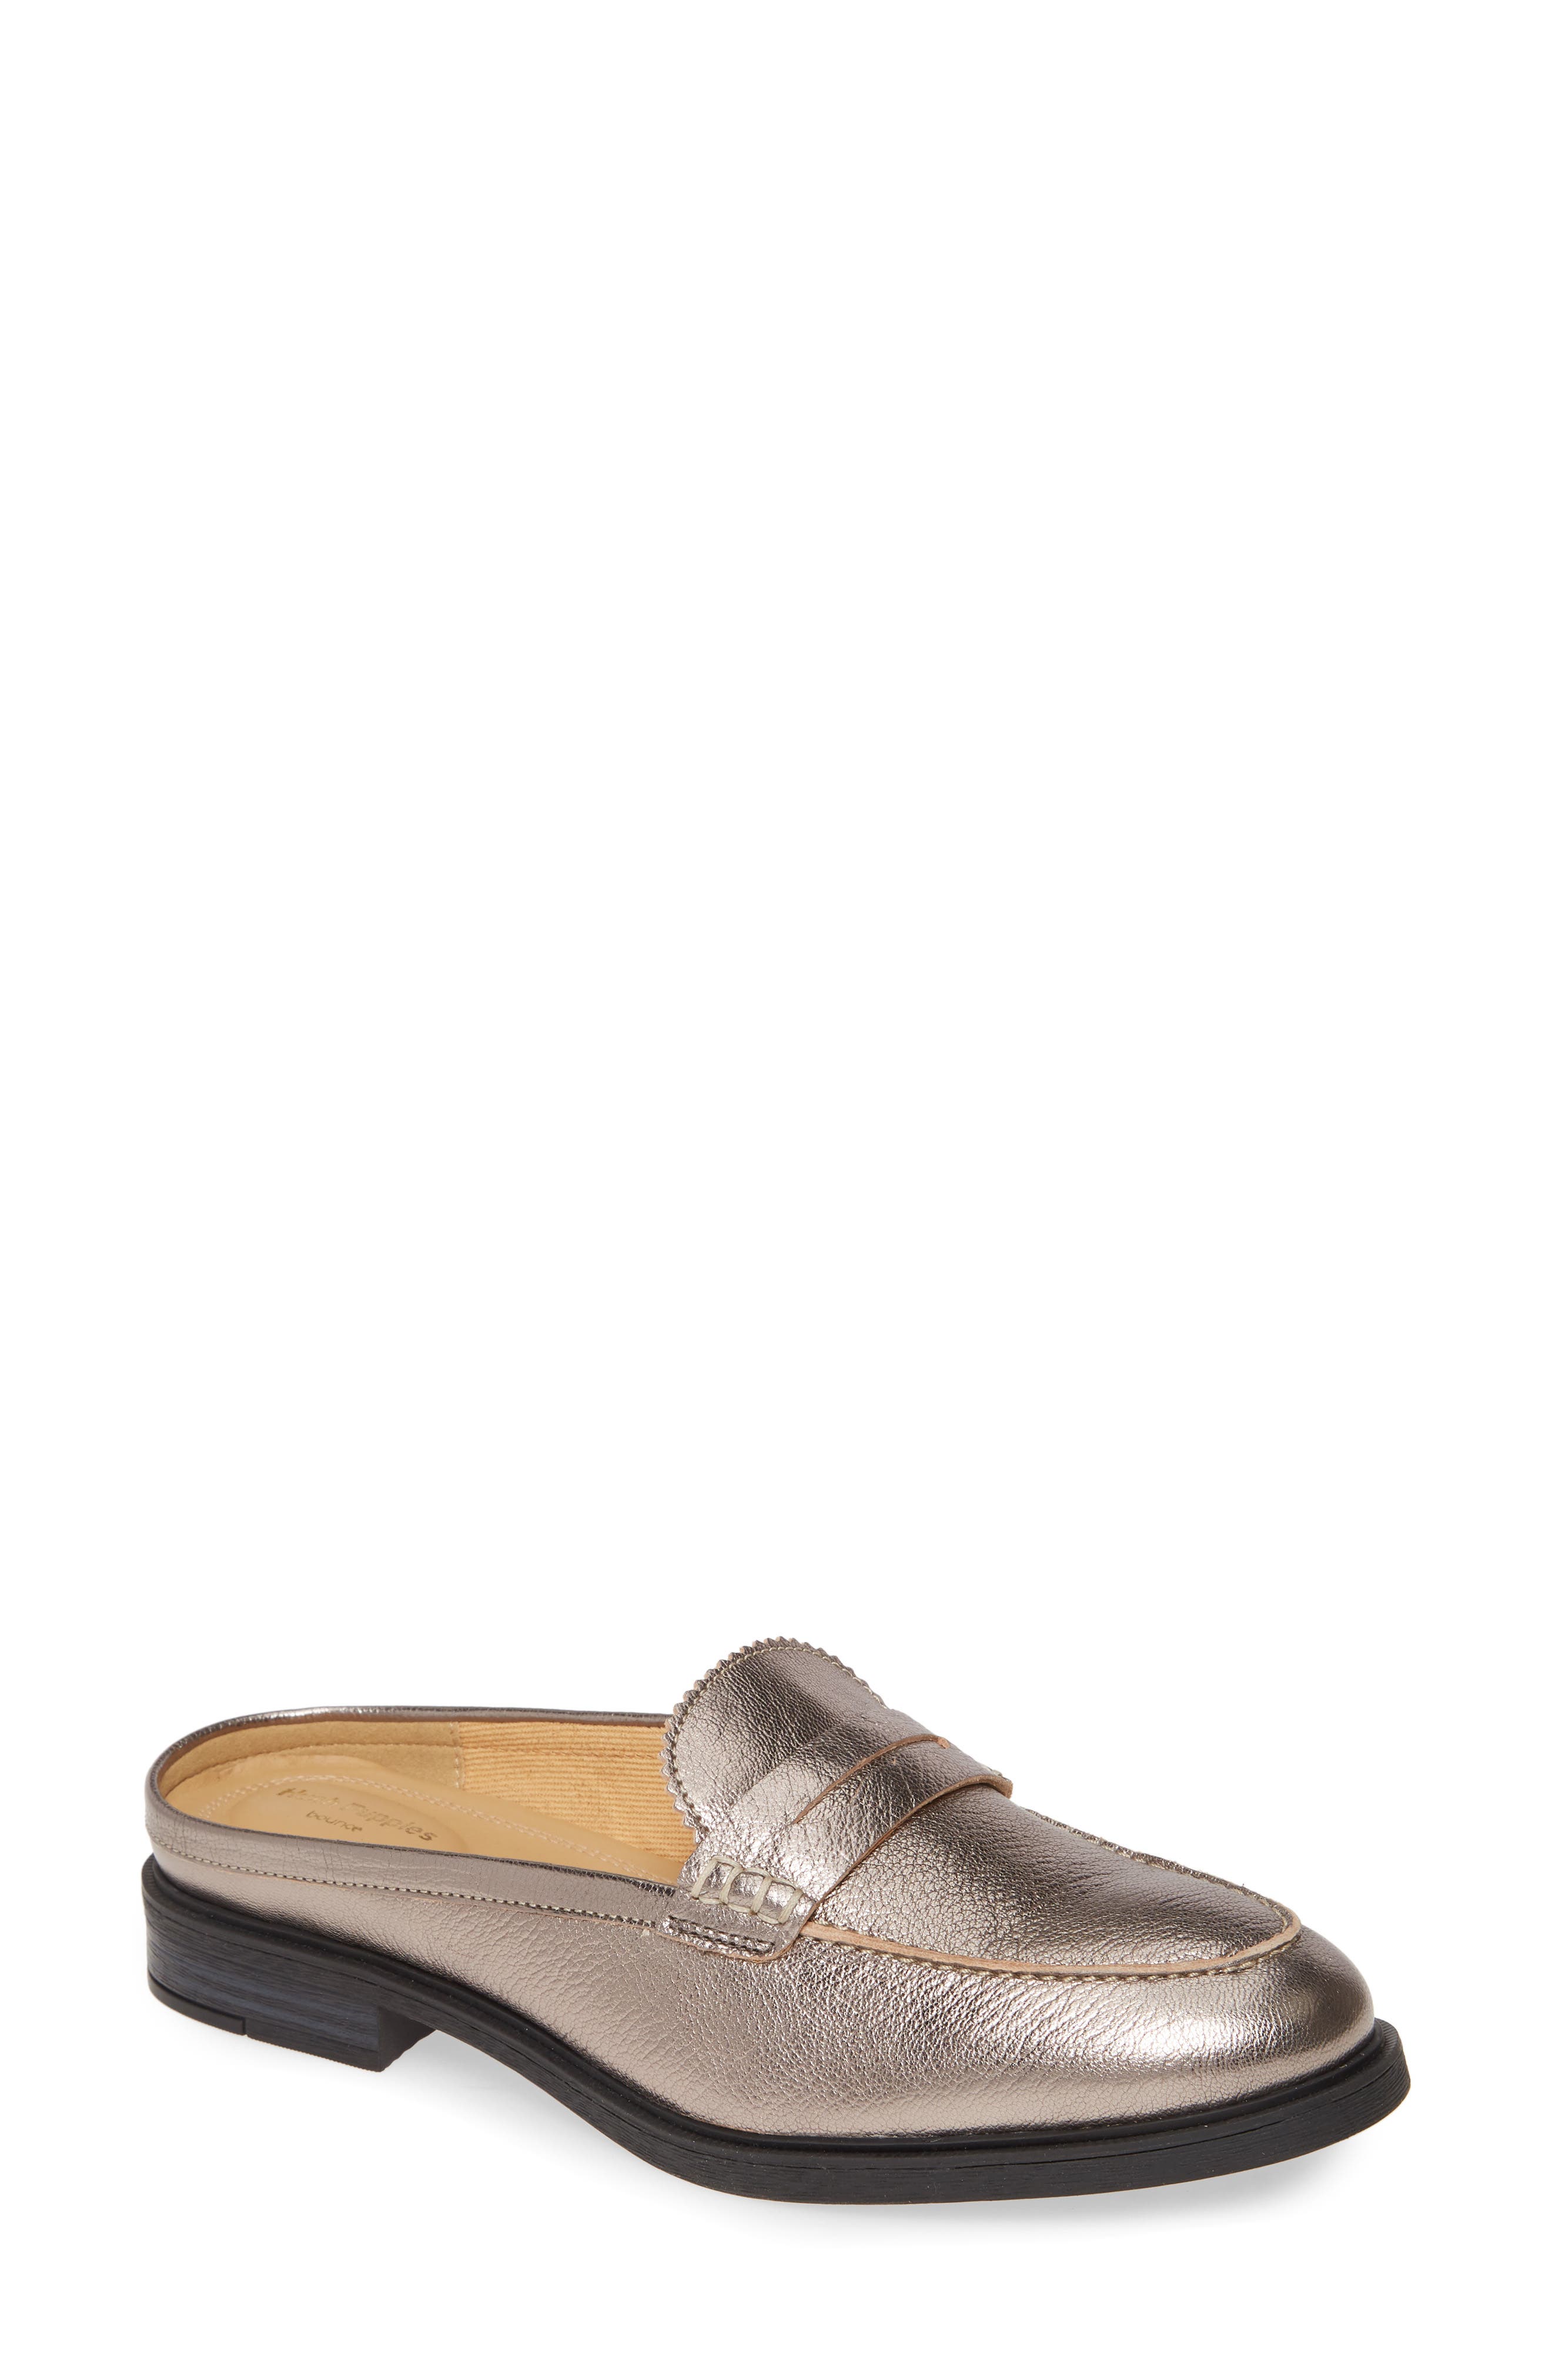 Hush Puppies | Bailey Penny Mule - Wide 